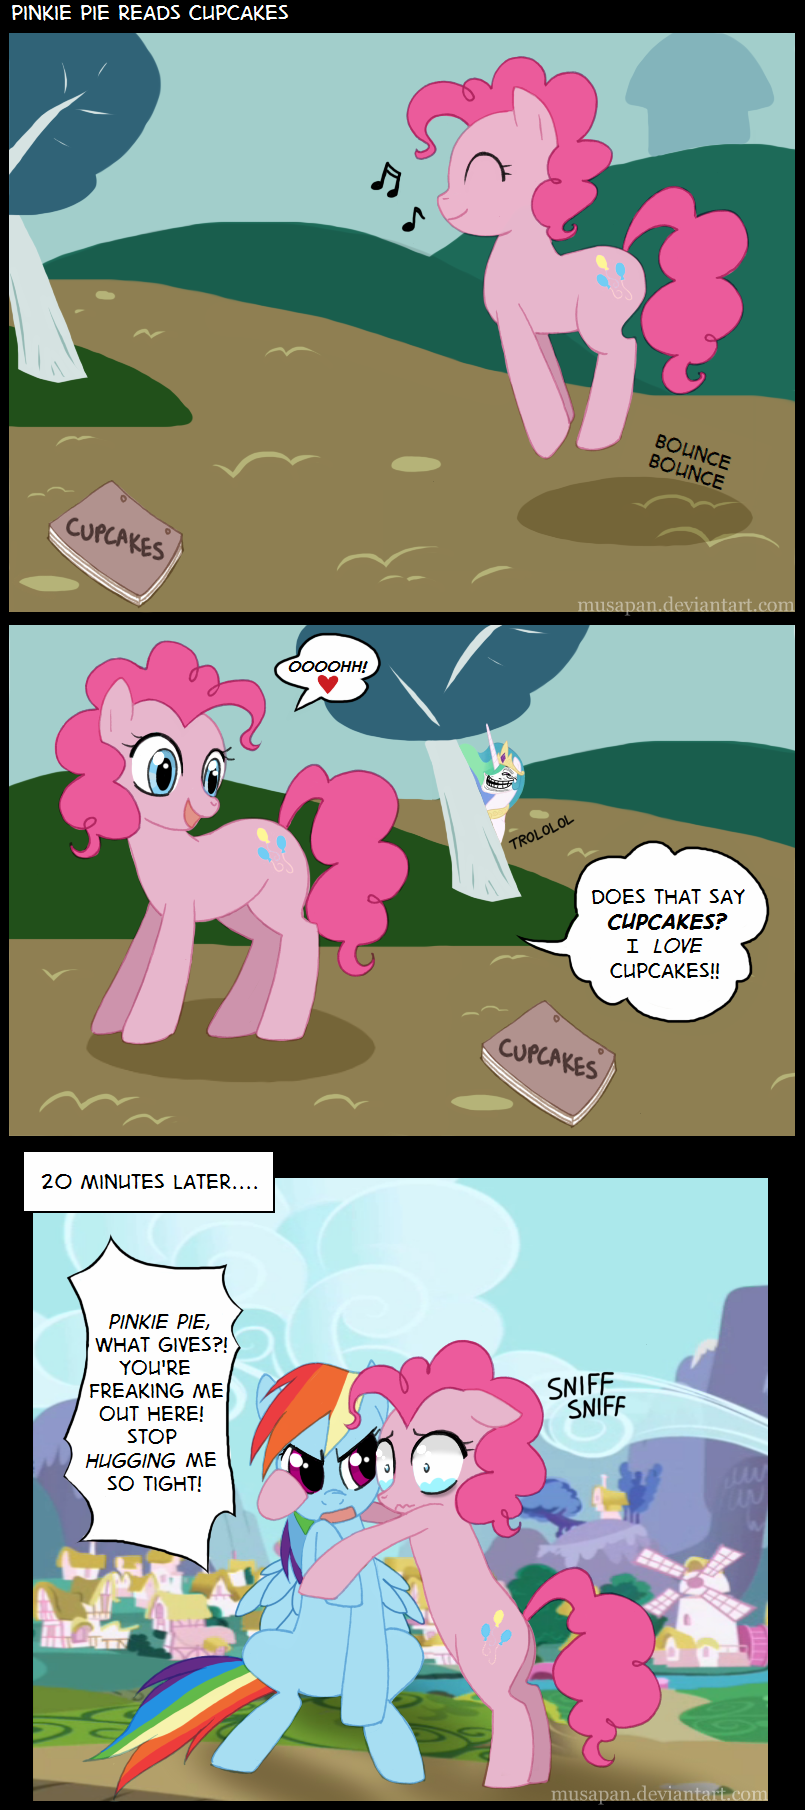 pinkie_pie_reads_cupcakes_by_musapan-d41